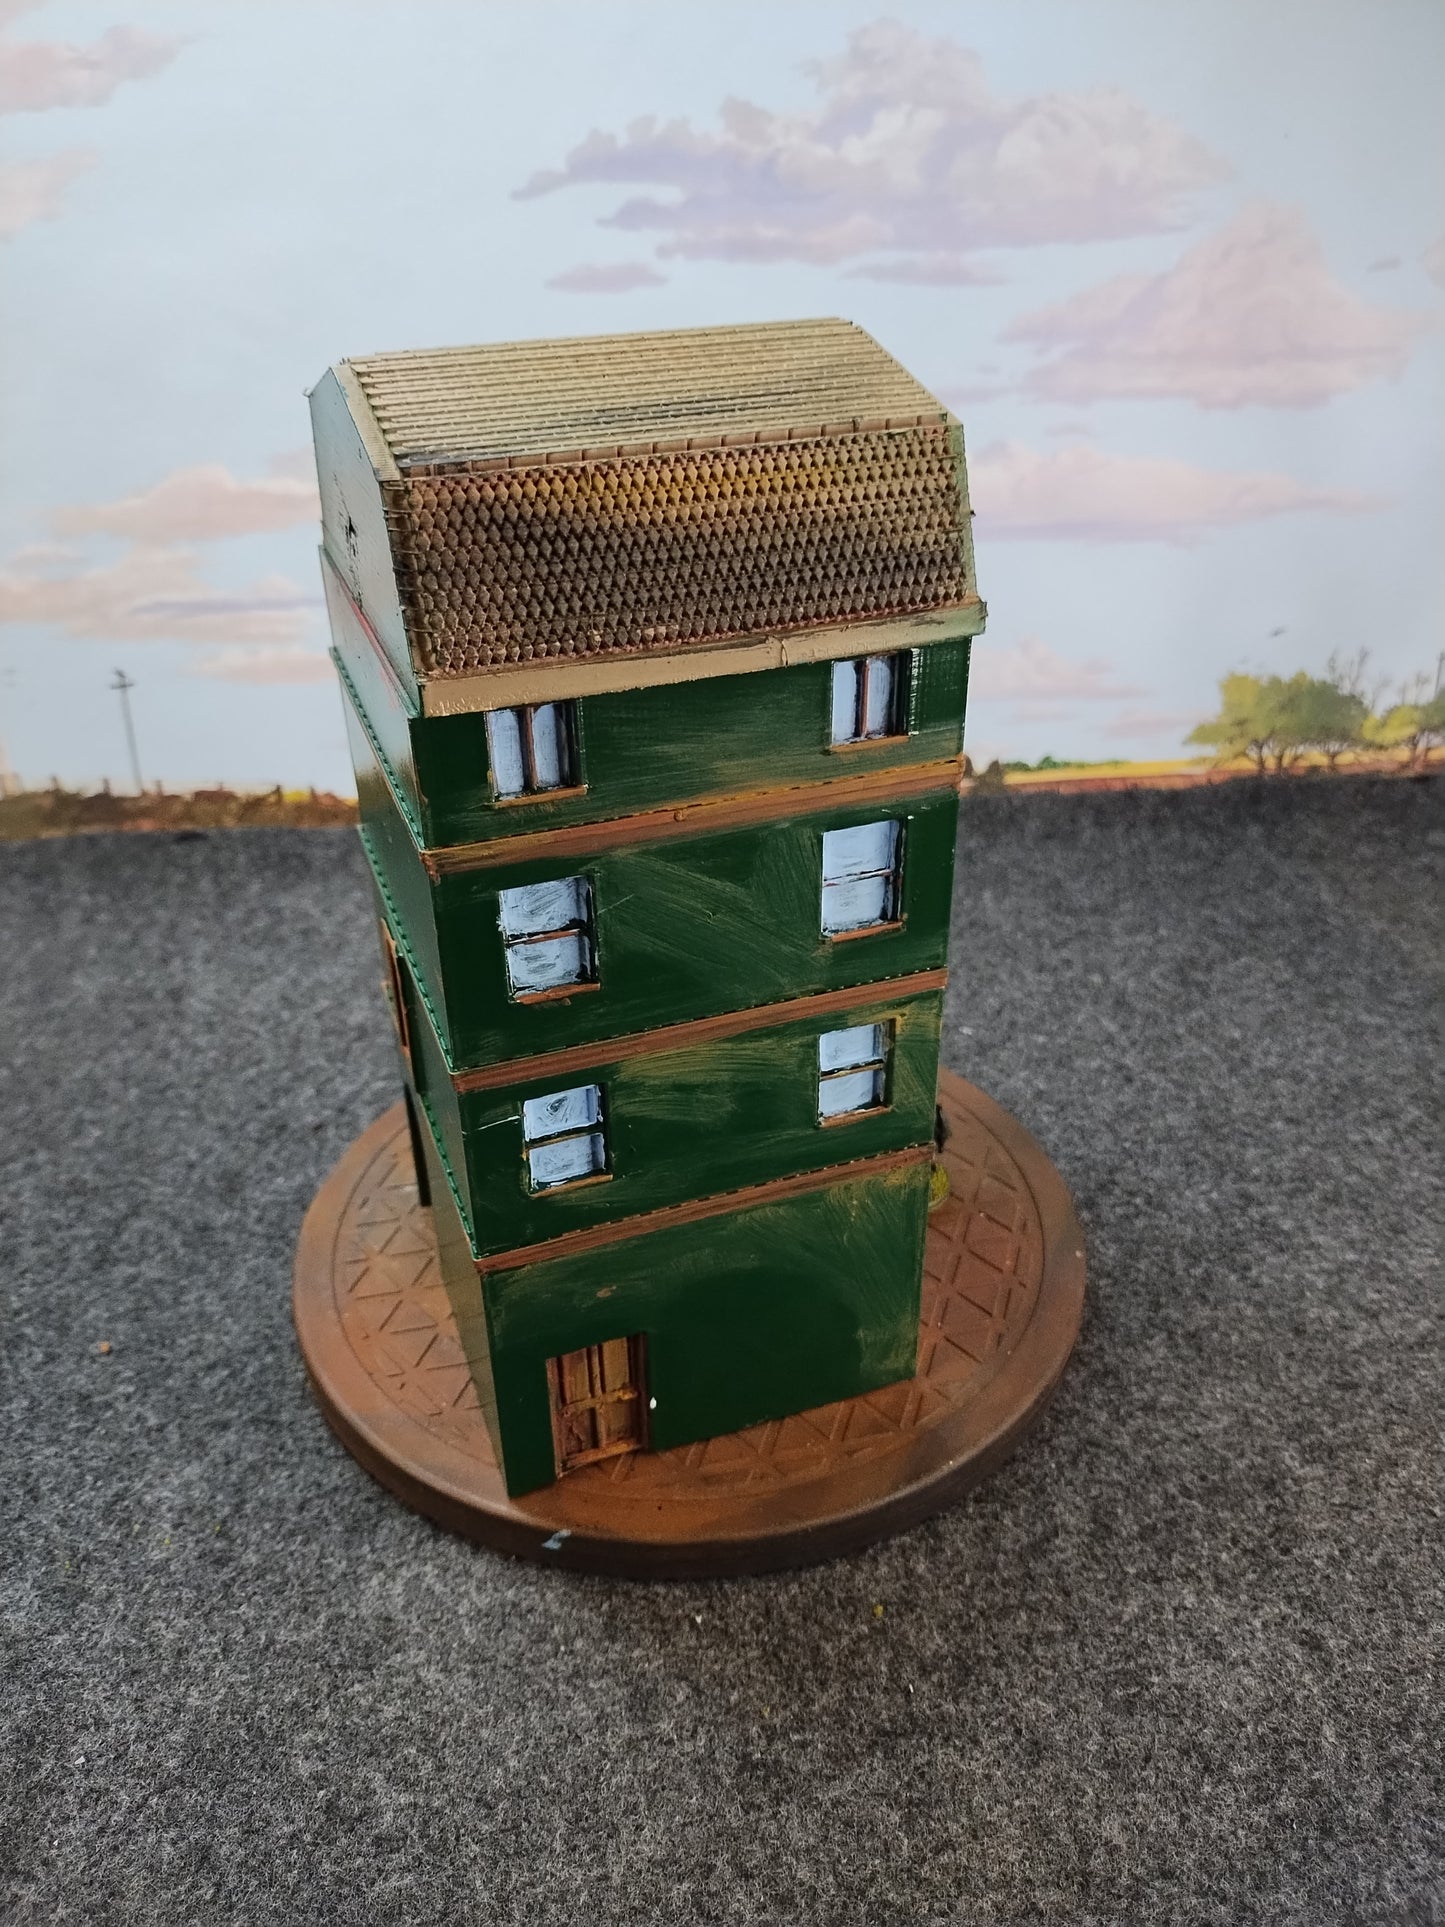 European Town Shop 3-story - 28mm/Painted